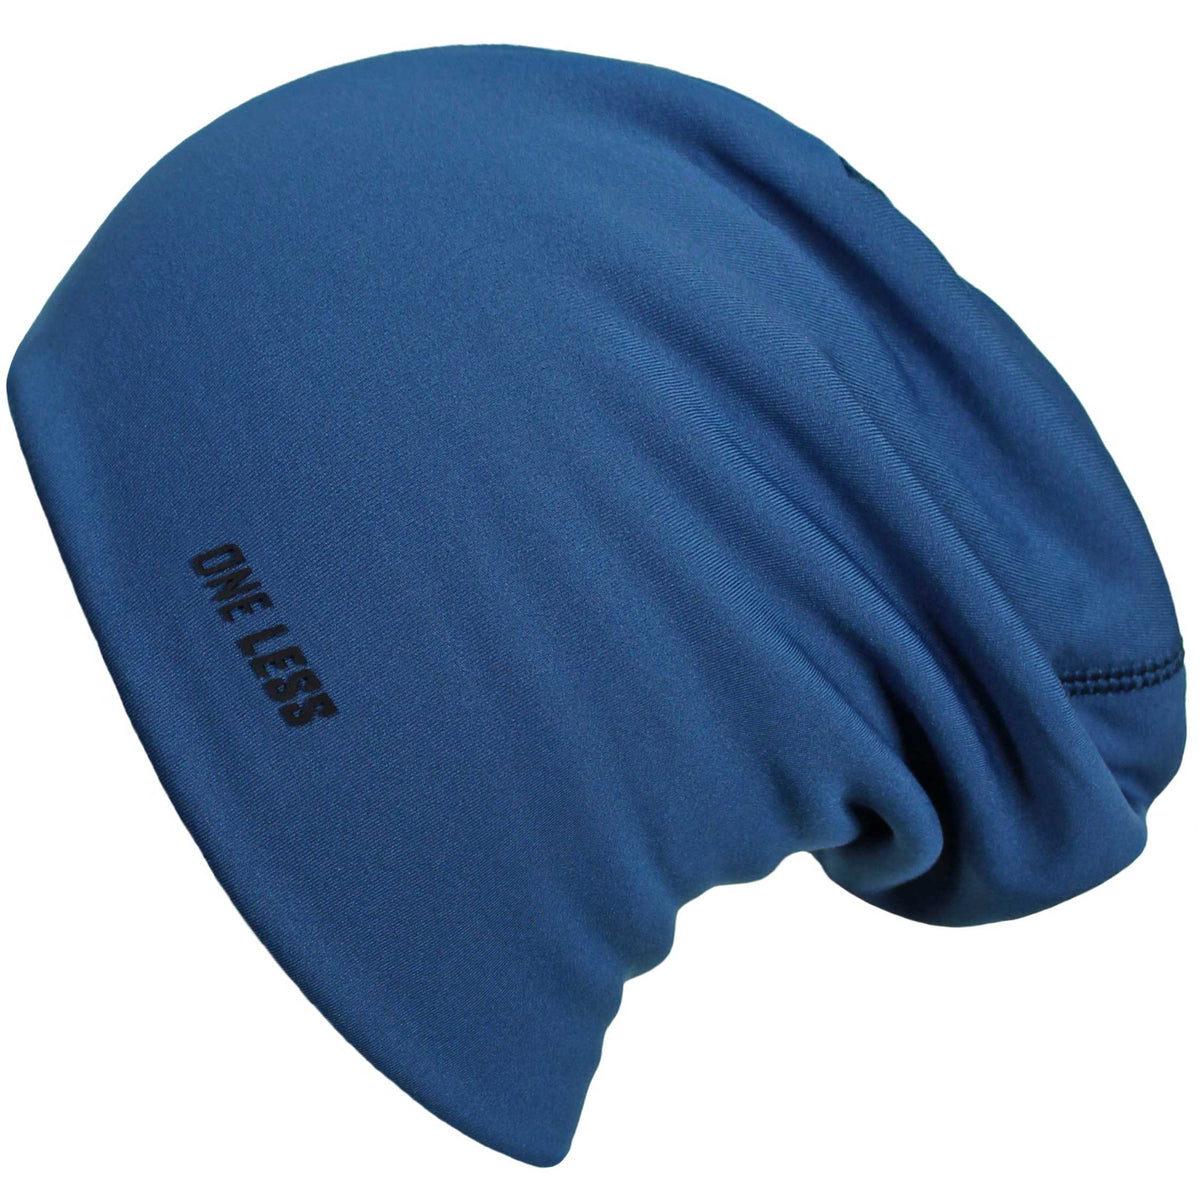 Mens XL Performance Beanie - - Flex King The and Fleece Fifth Supply Outlier